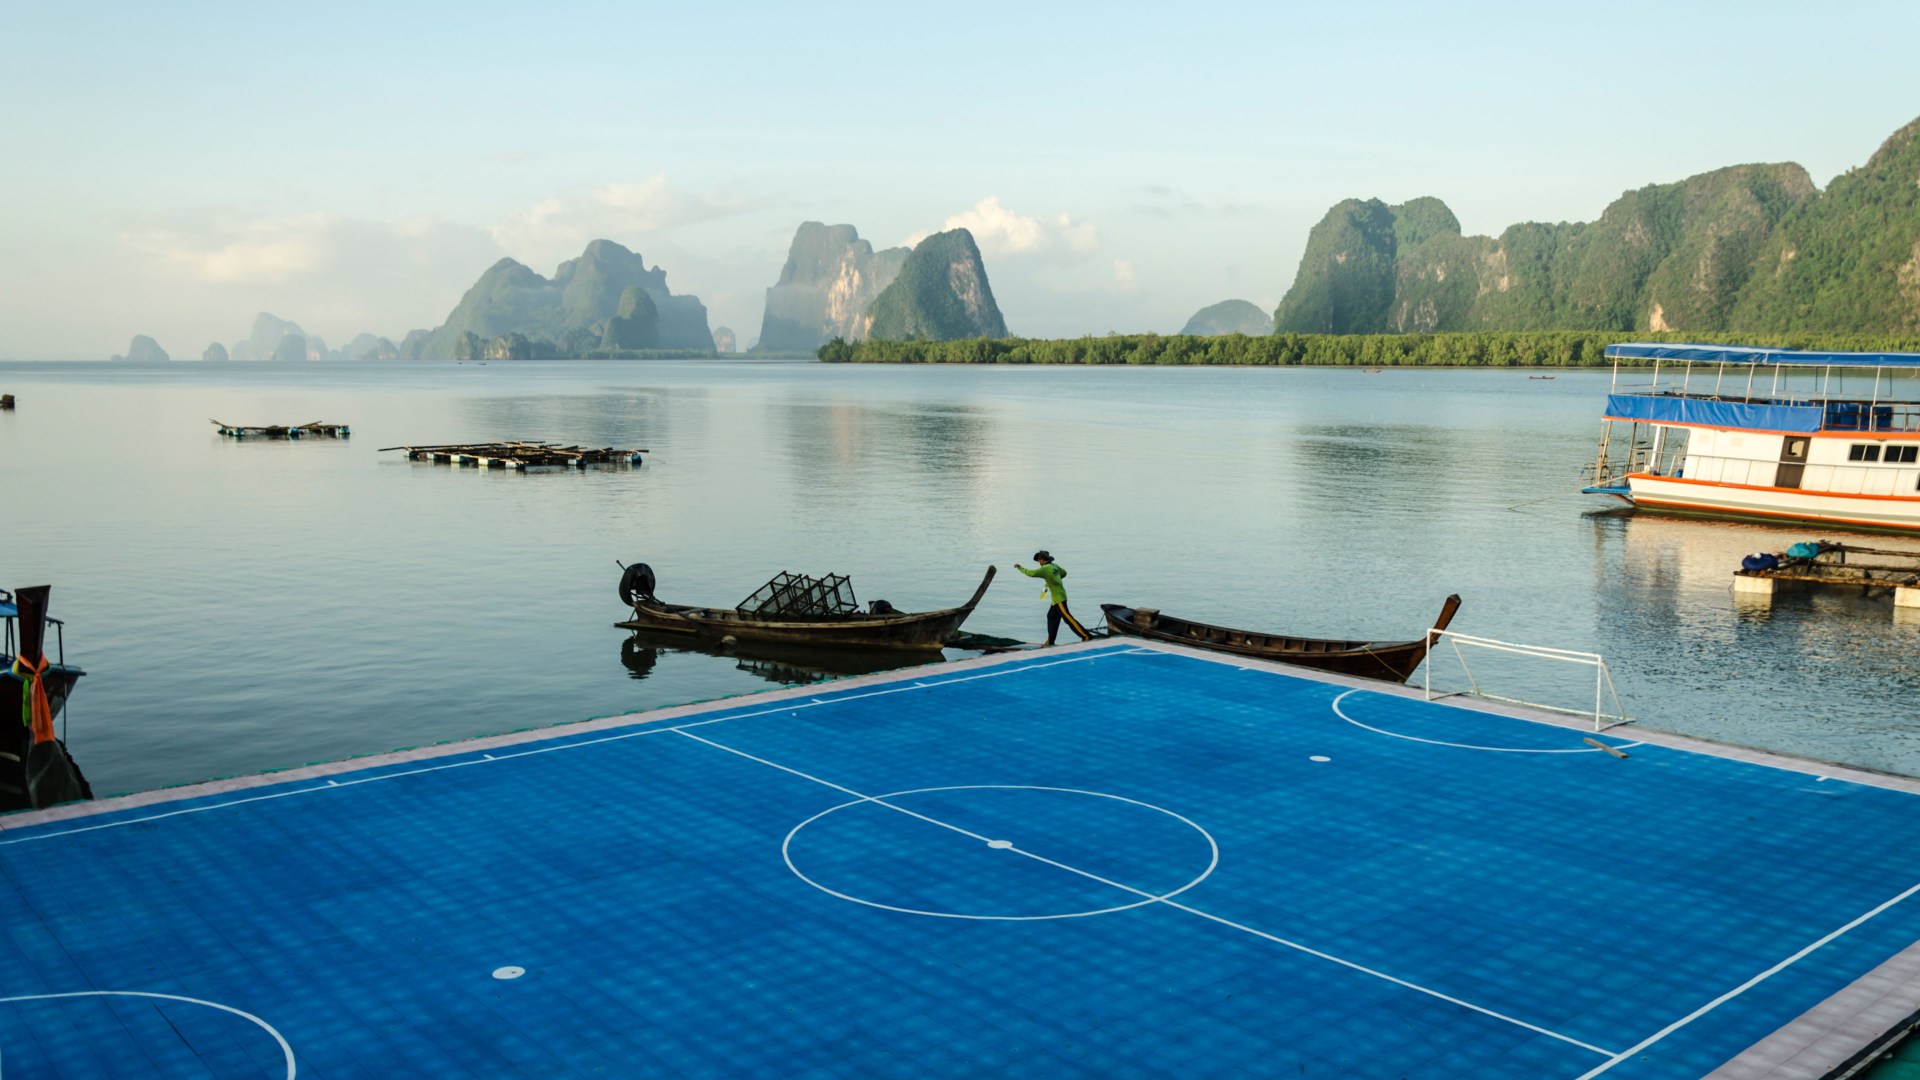 Discover the Floating Football Pitch with Exotic Fish and Tiny Islands – A Once in a Lifetime Experience!